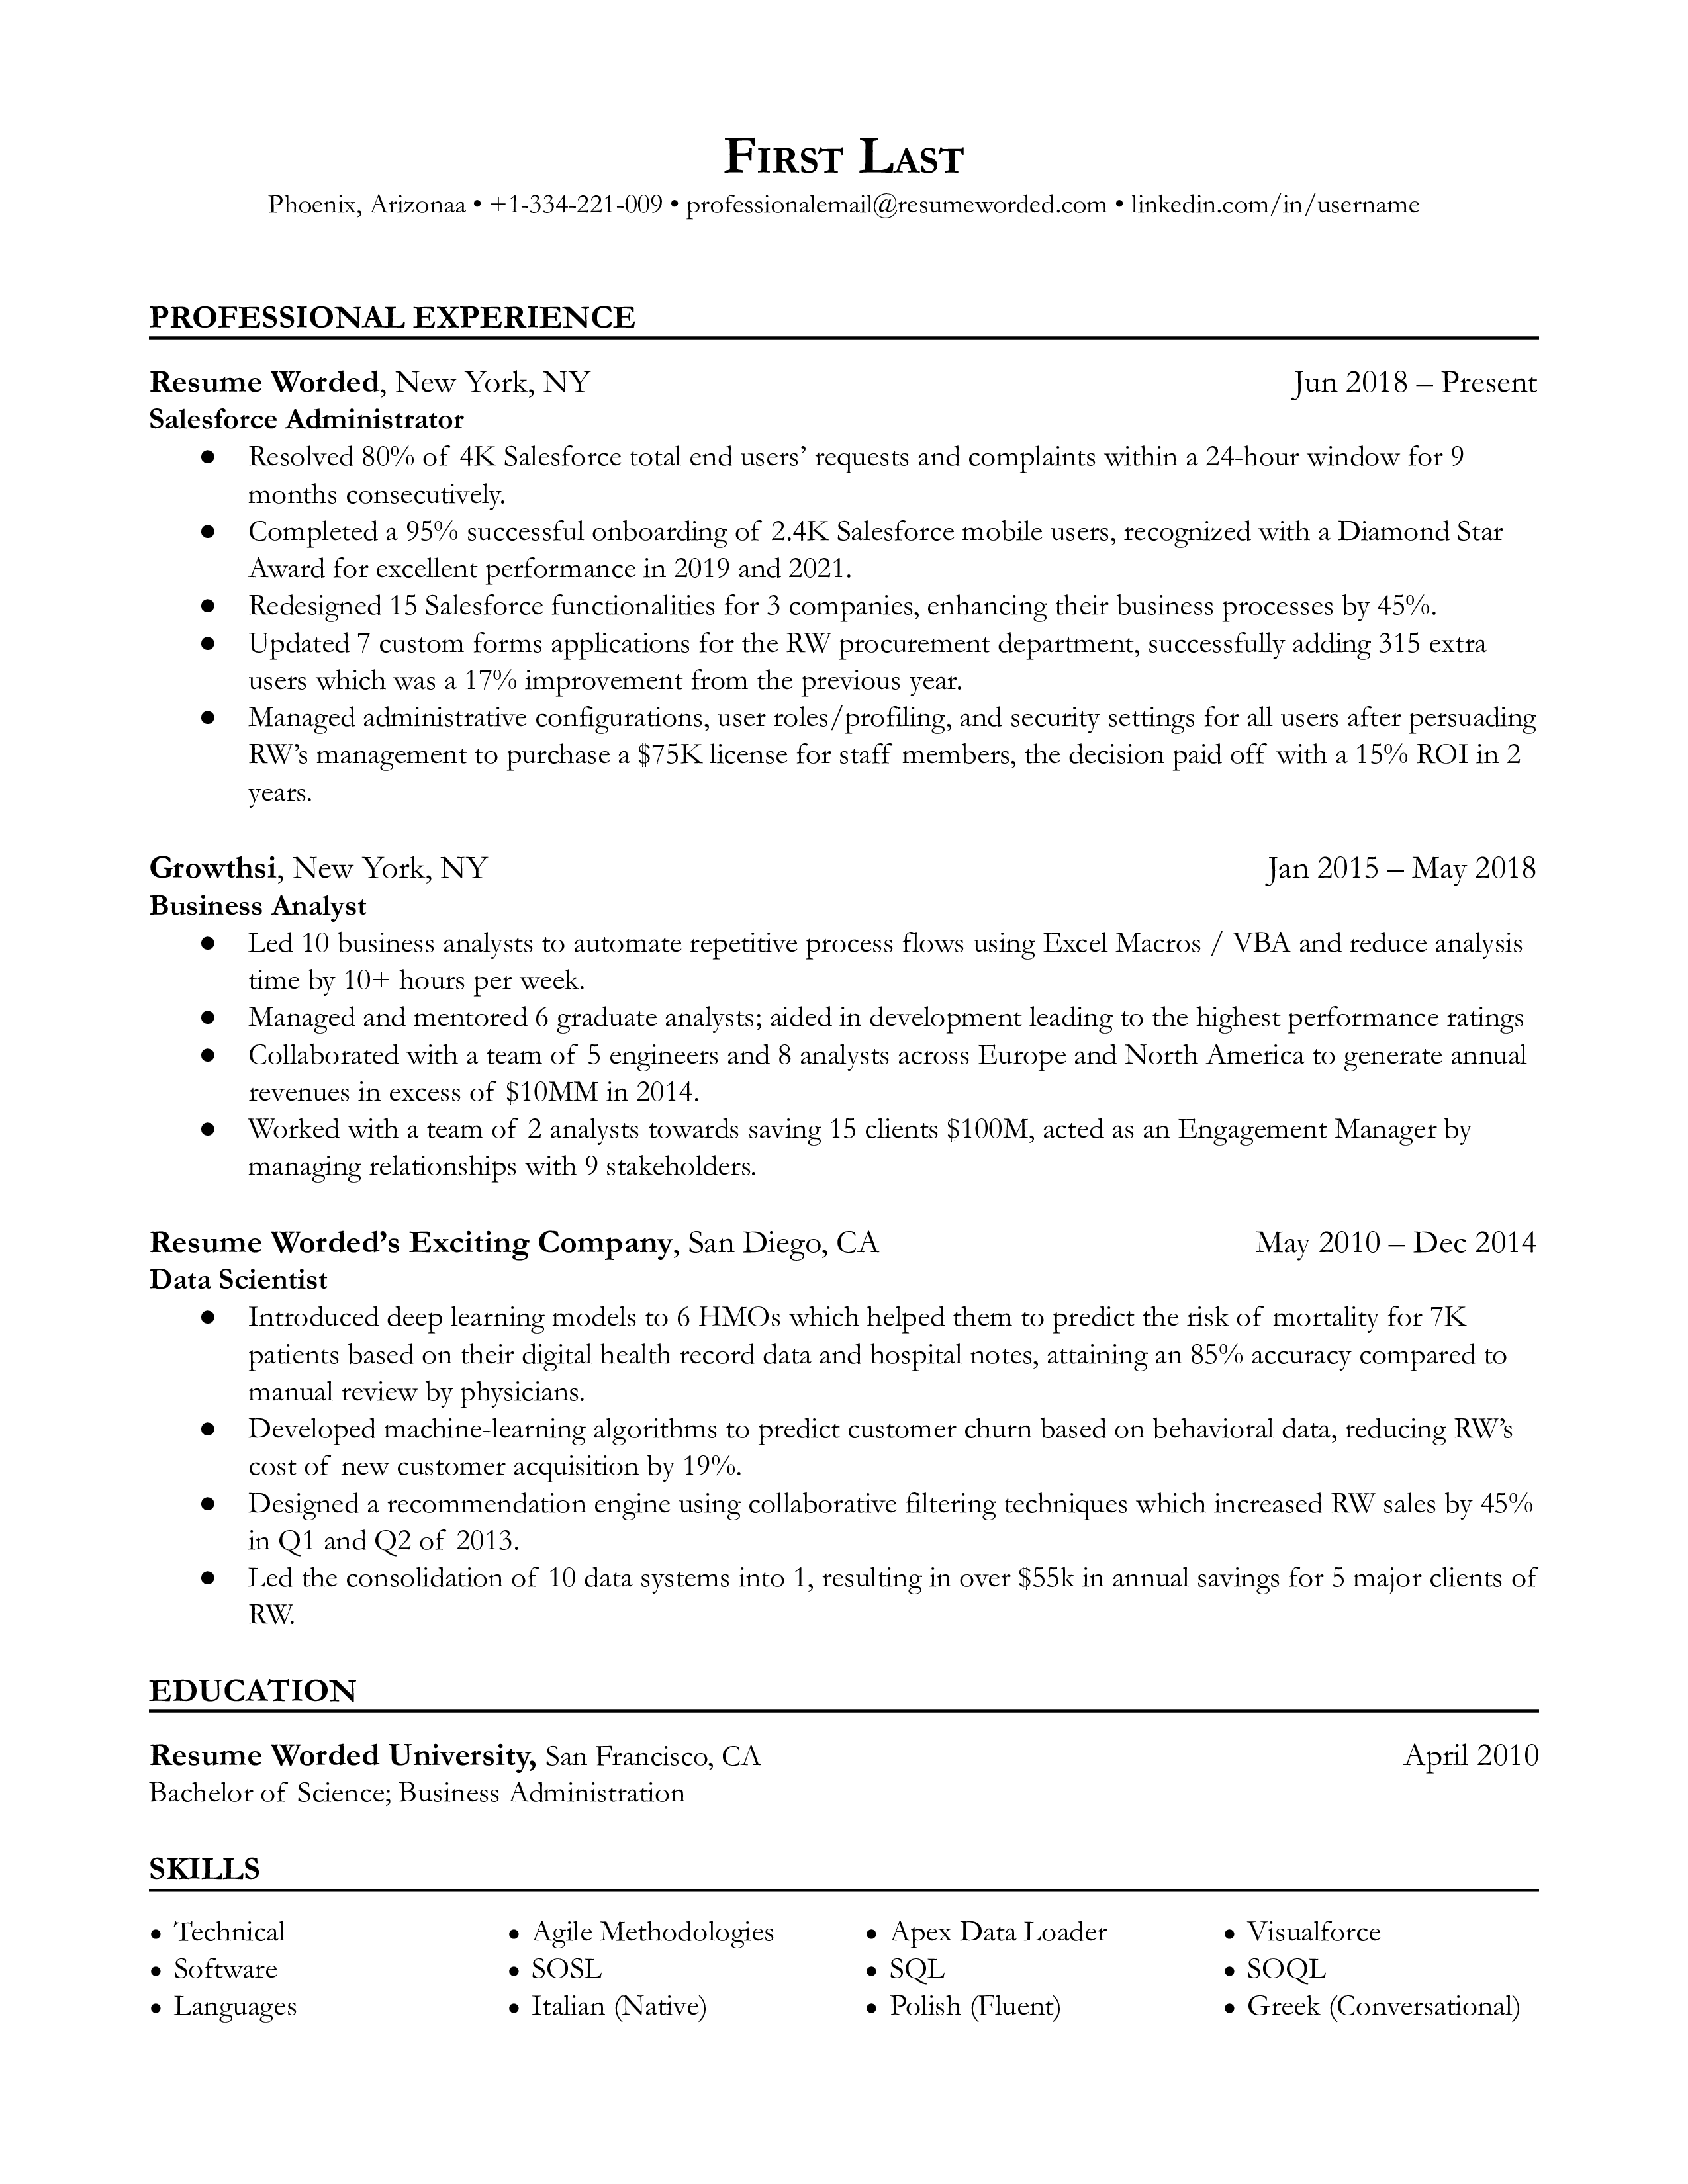 A salesforce administrator resume template that prioritizes work experience